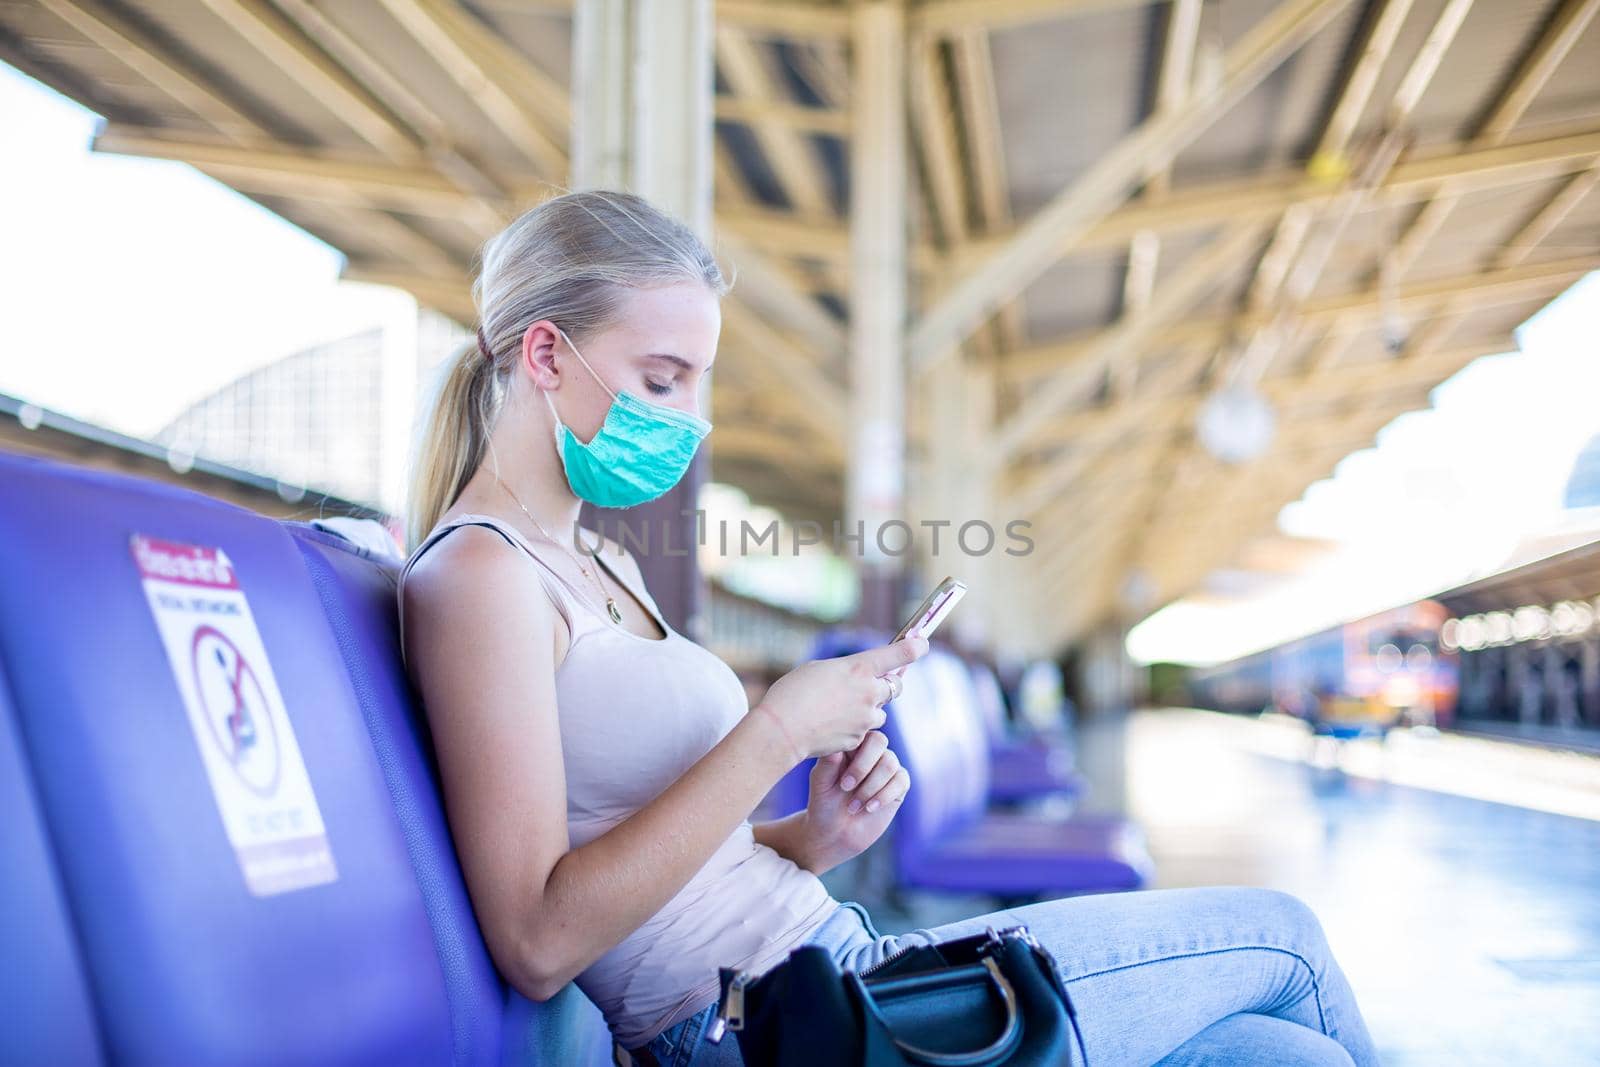 young woman with face mask waiting in vintage train, relaxed and carefree at the station platform in Bangkok, Thailand before catching a train. Travel photography. Lifestyle.